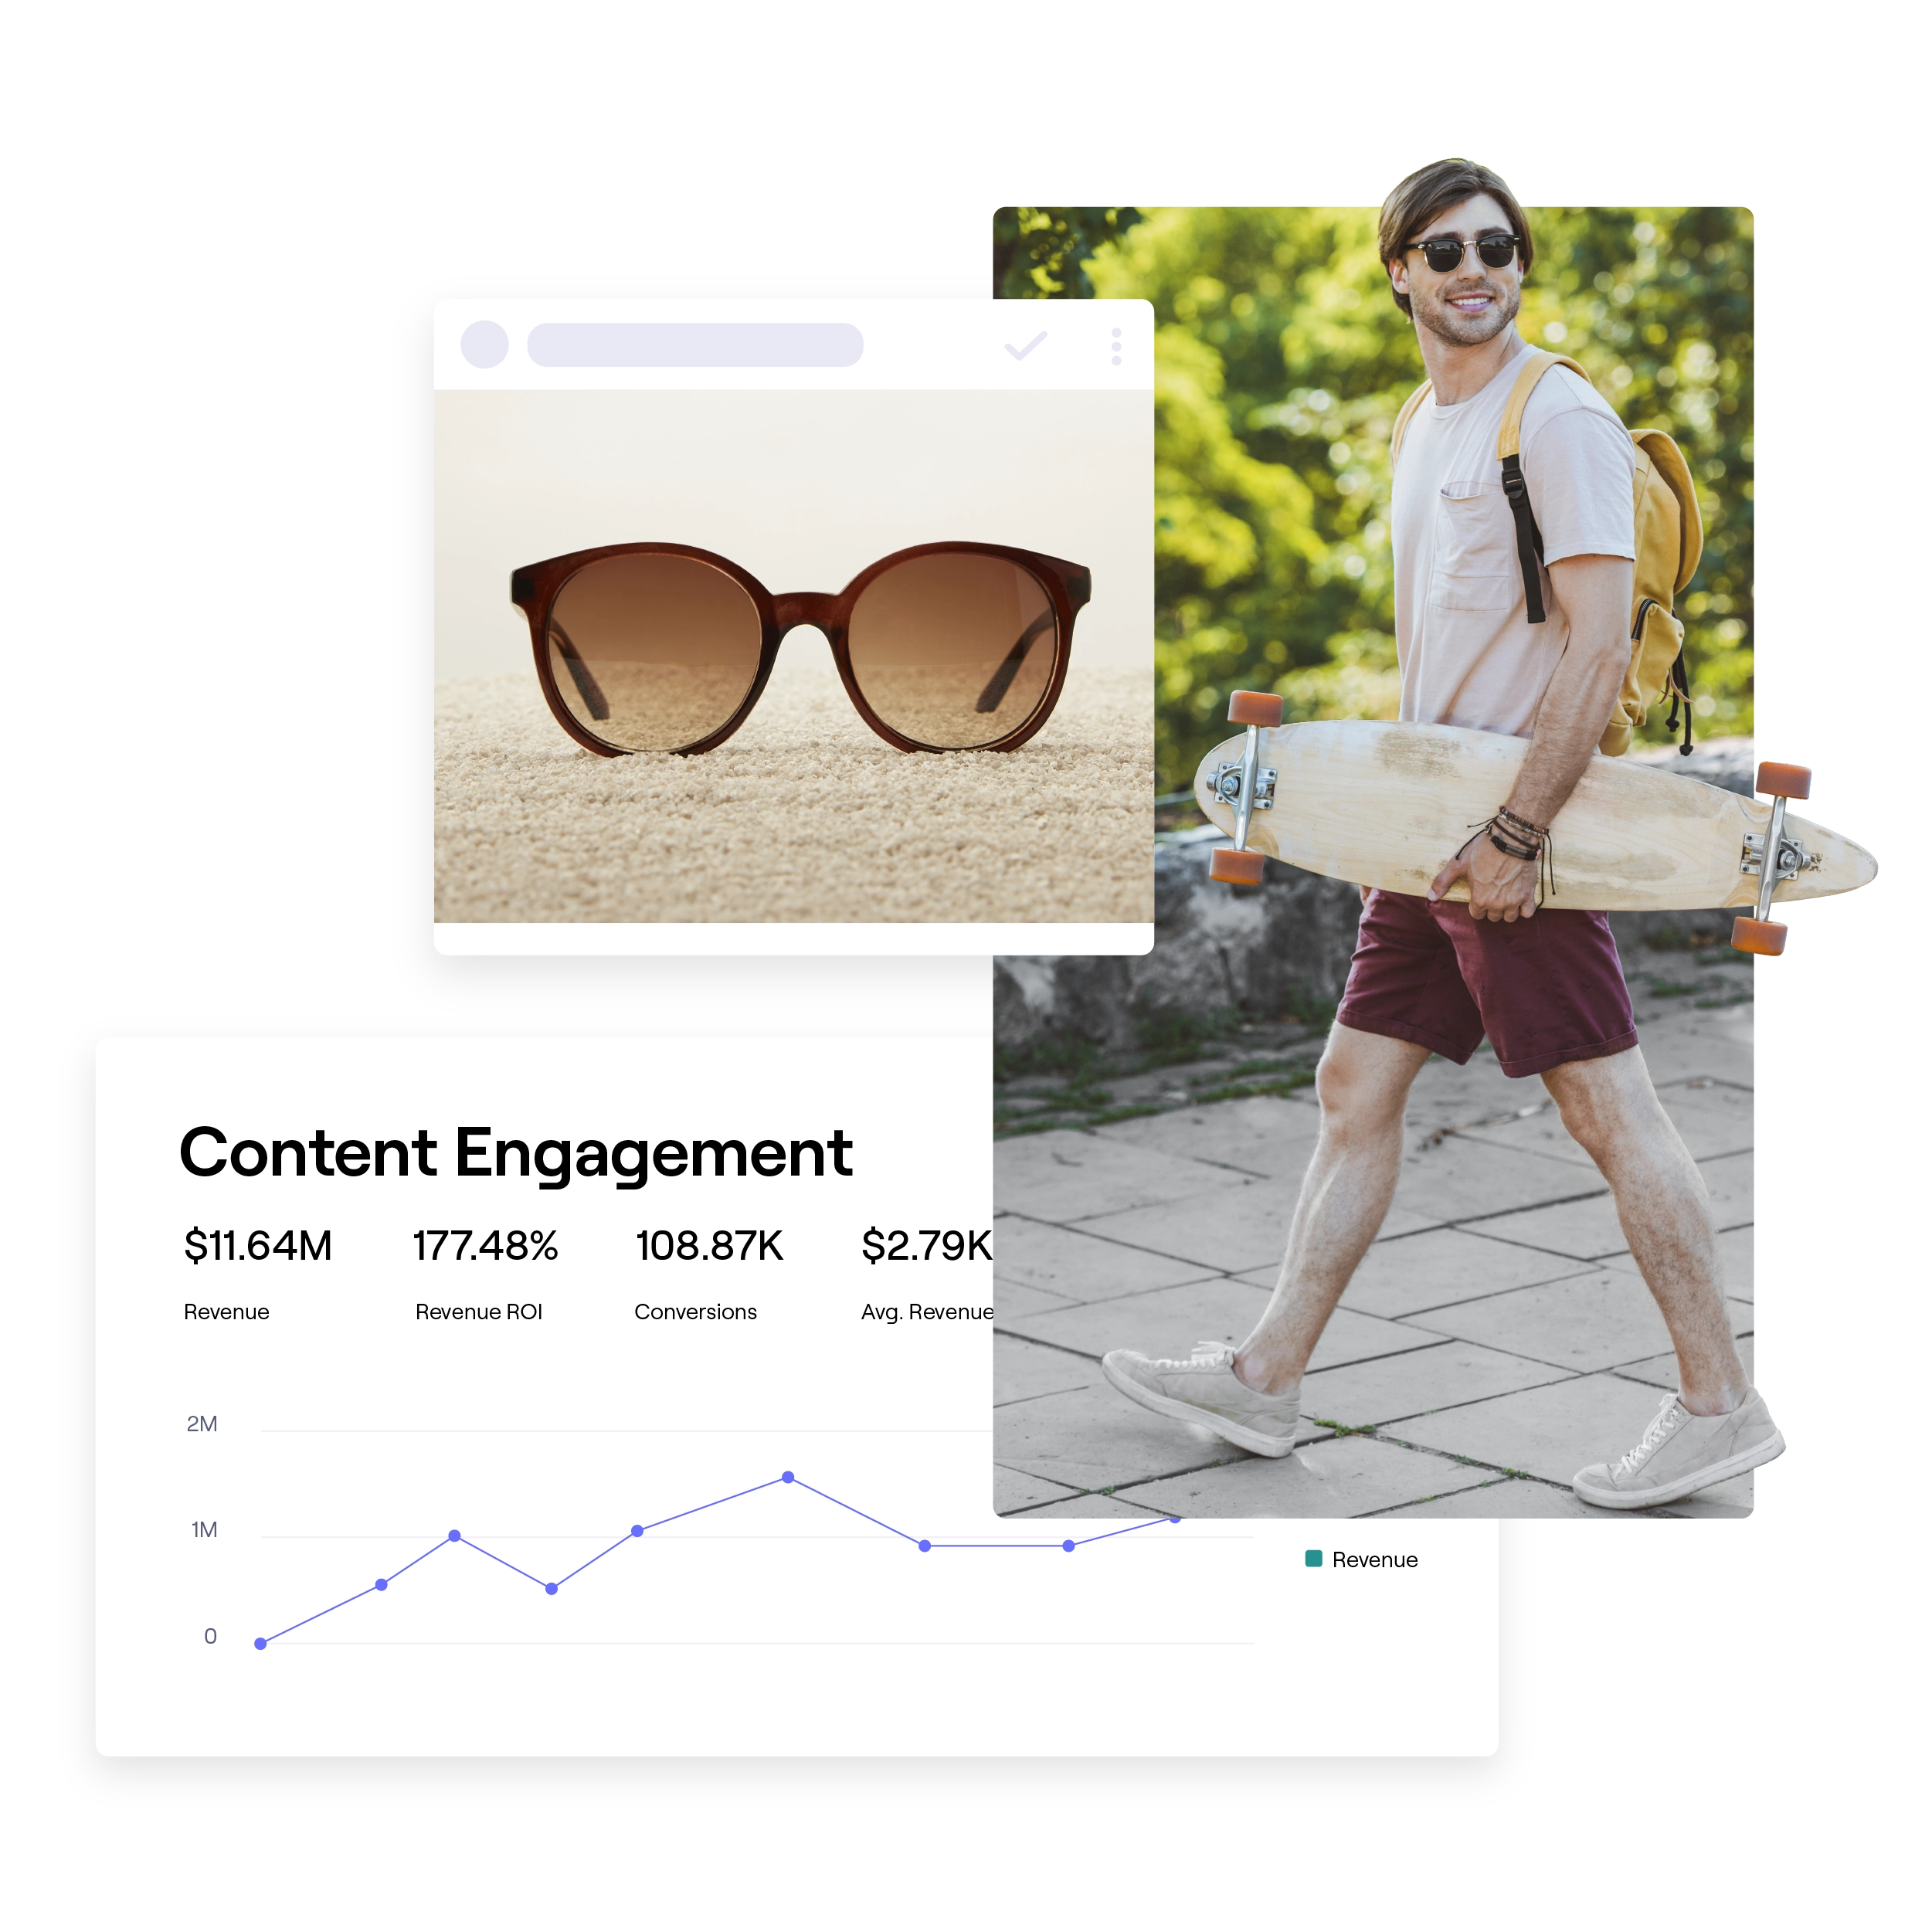 stylized images of an influencer, sunglasses, and a line graph